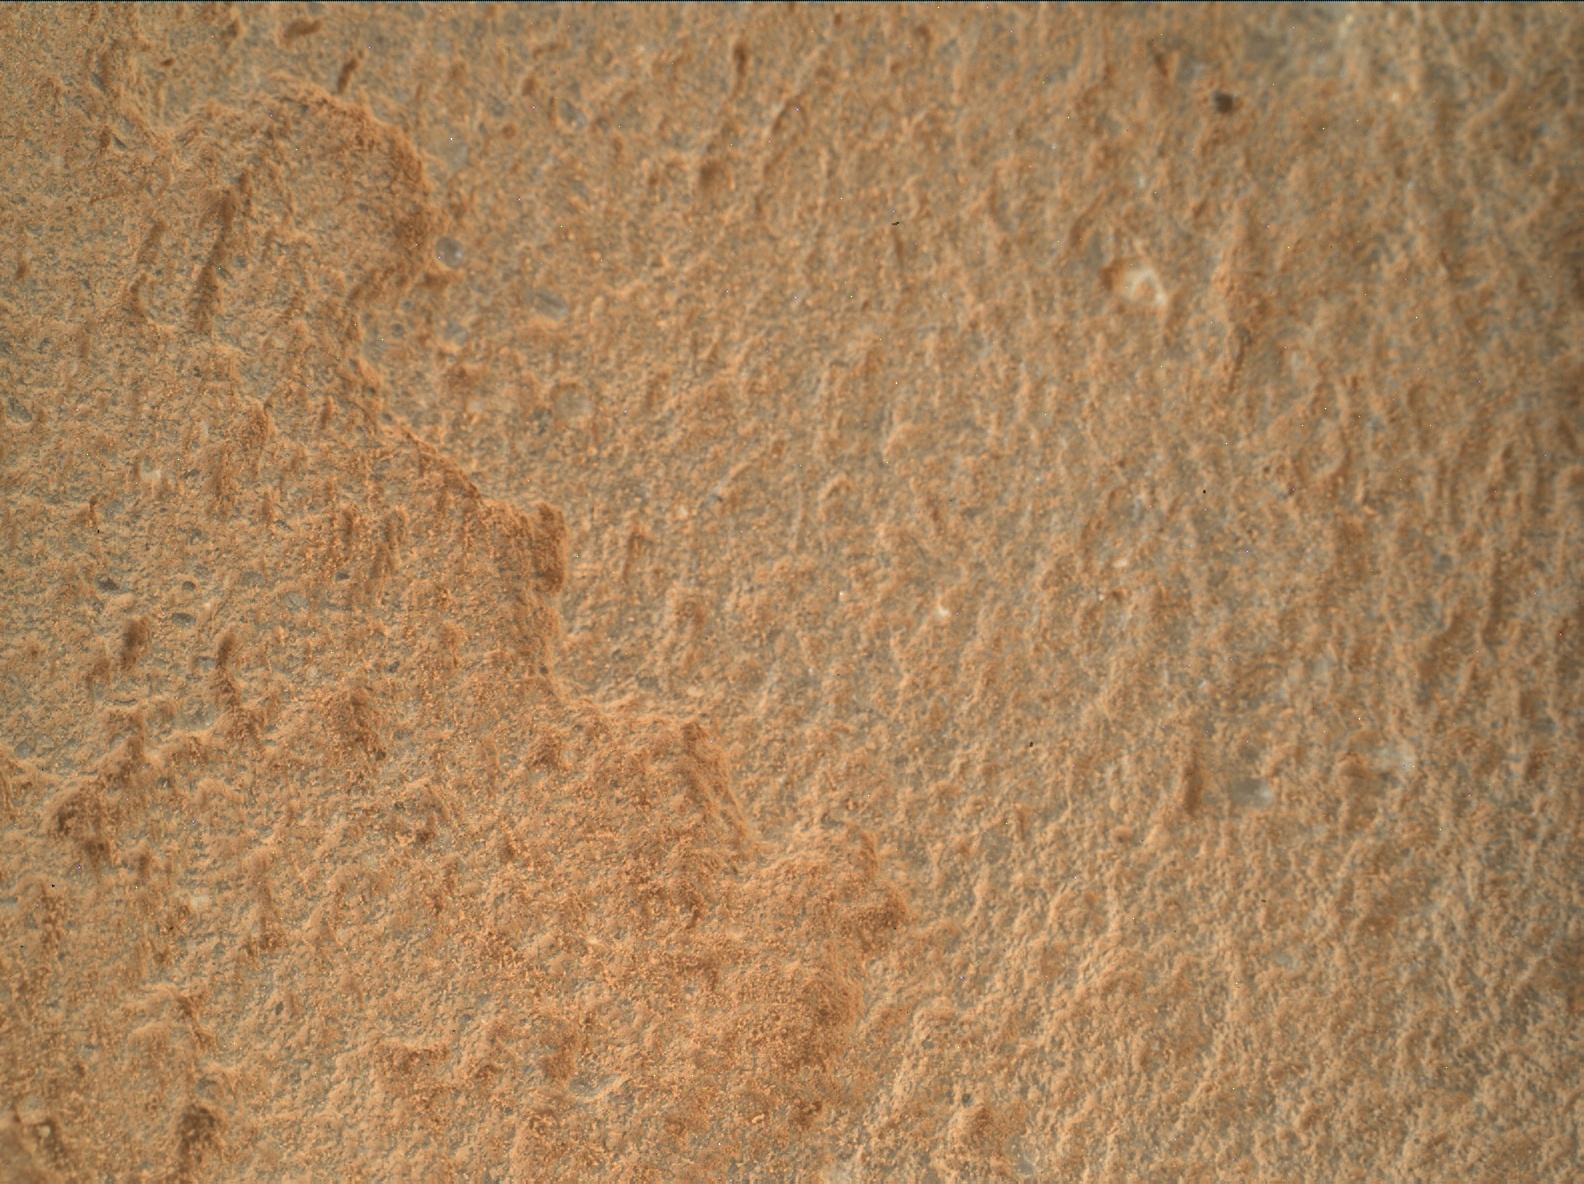 Nasa's Mars rover Curiosity acquired this image using its Mars Hand Lens Imager (MAHLI) on Sol 2696